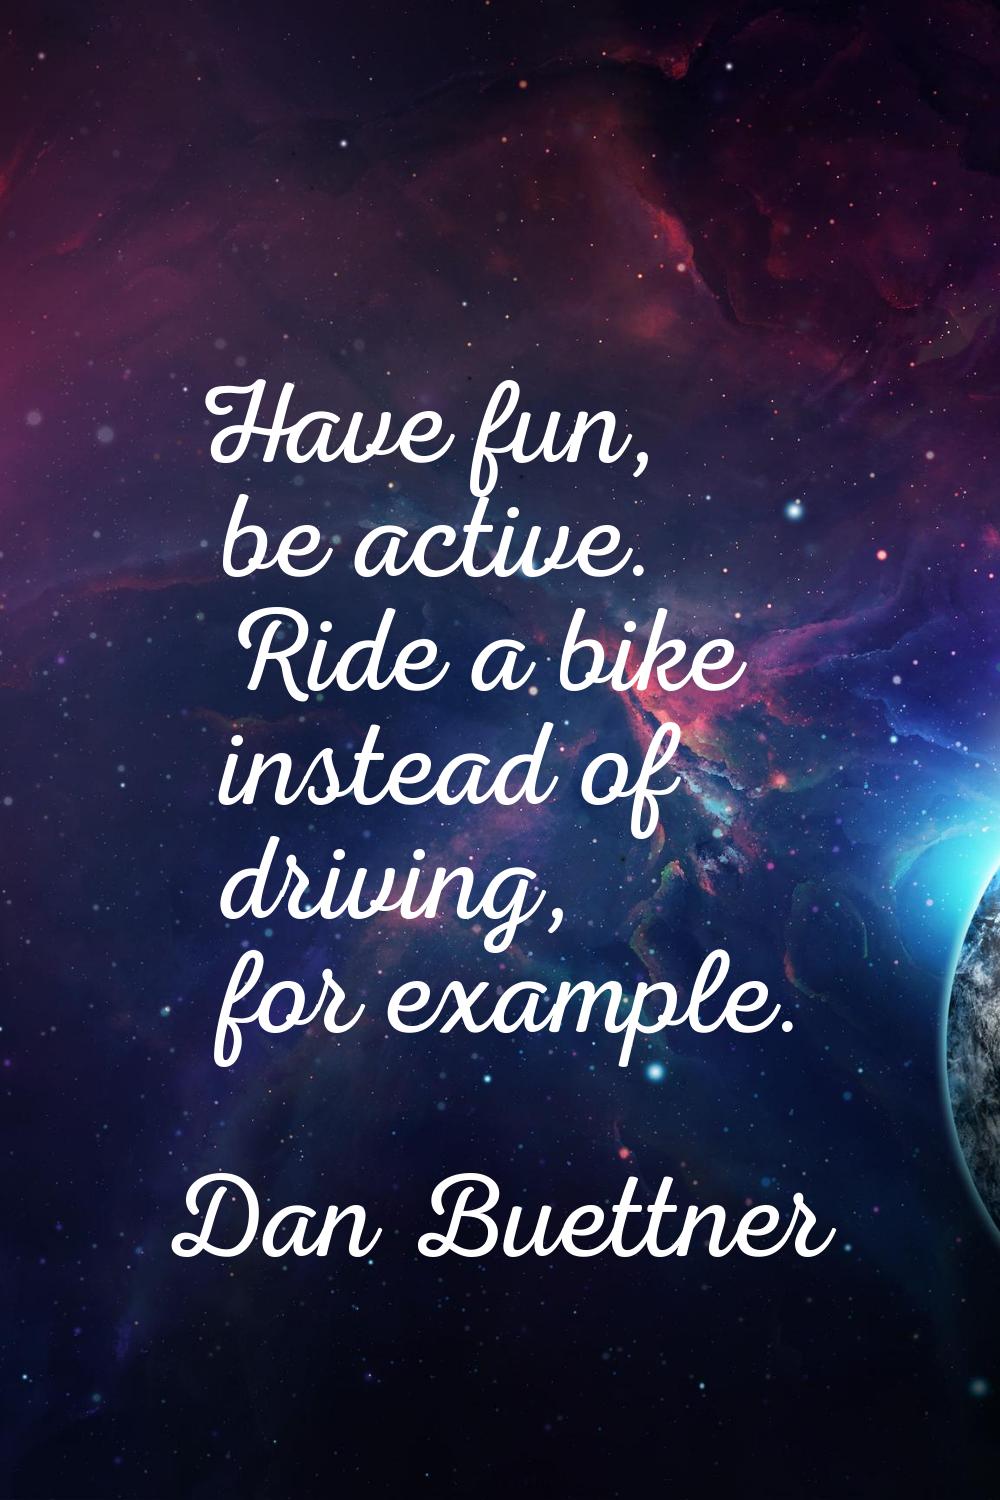 Have fun, be active. Ride a bike instead of driving, for example.